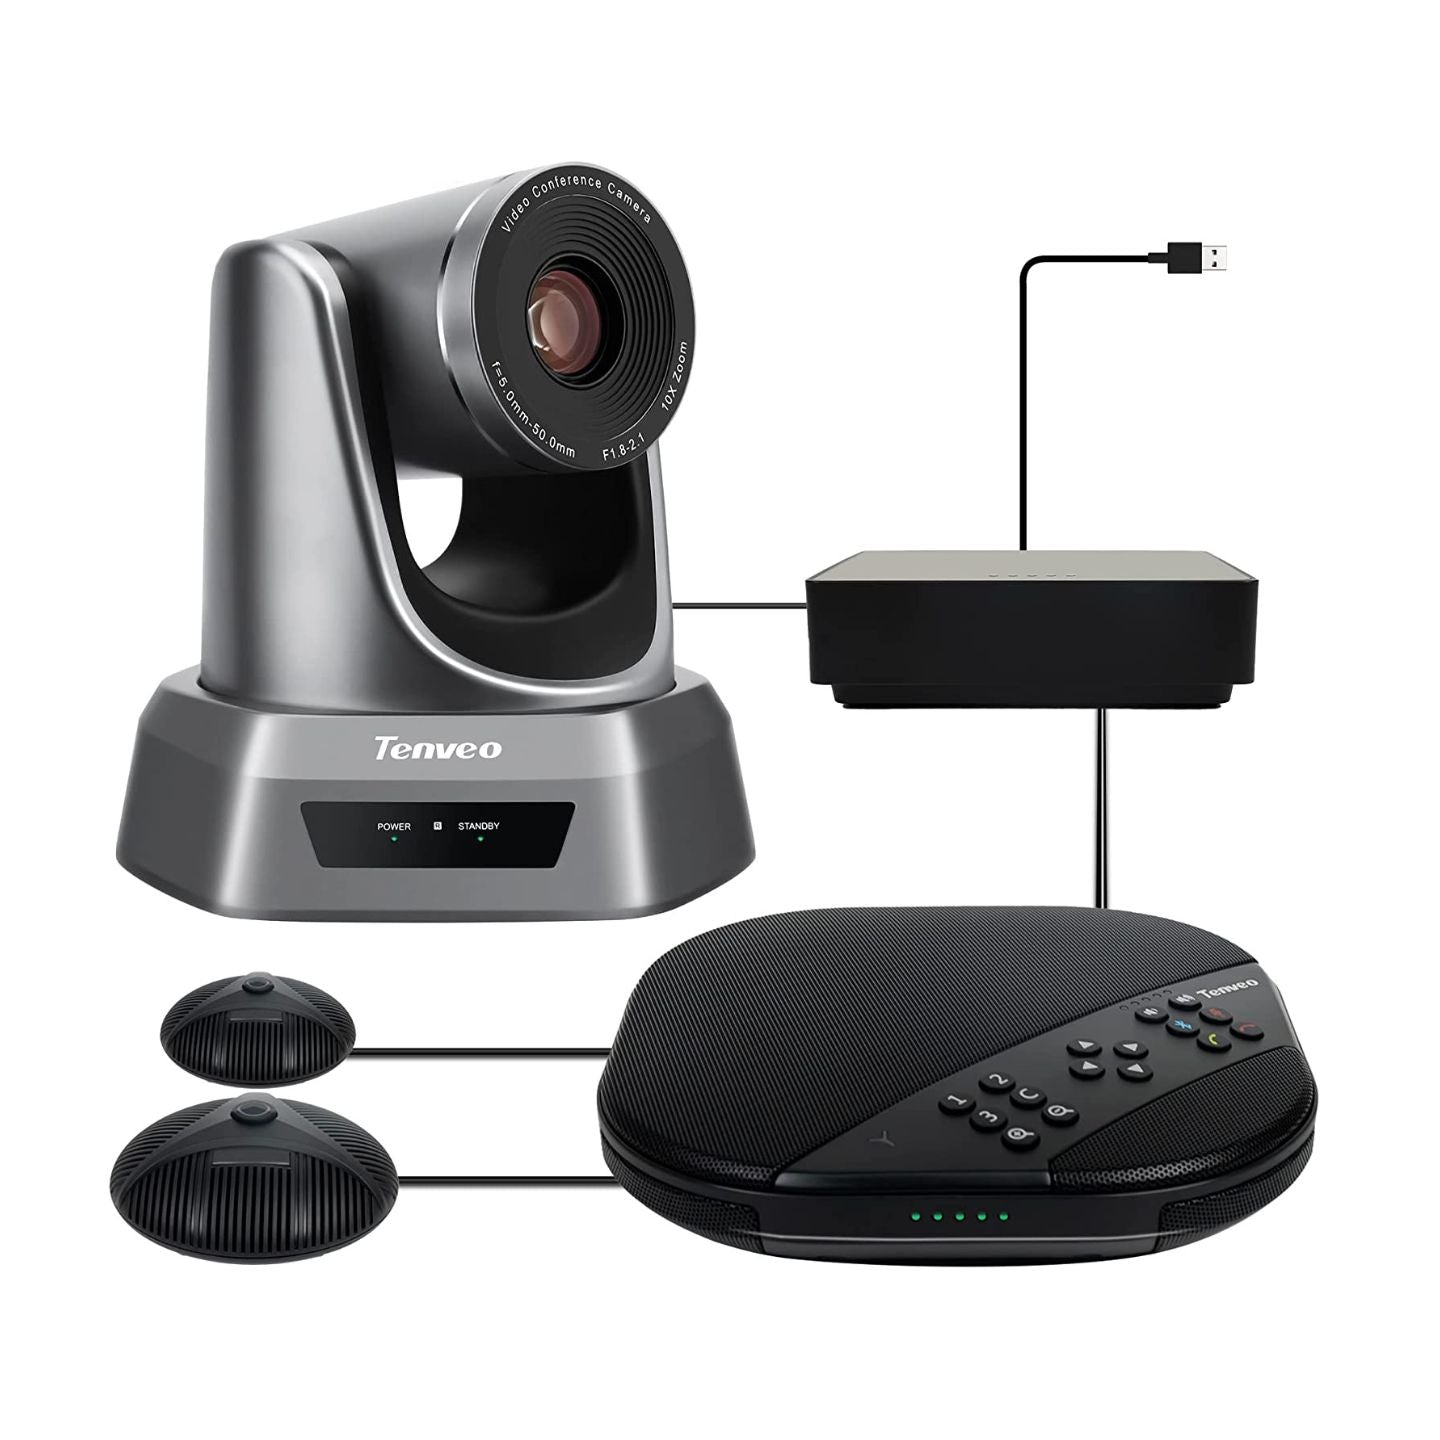 Tenveo VA3000E All-in-1 Audio Video Conference System with 10X Optical Zoom, Bluetooth Speaker, Expansion Microphones Compatible with Laptops & PC